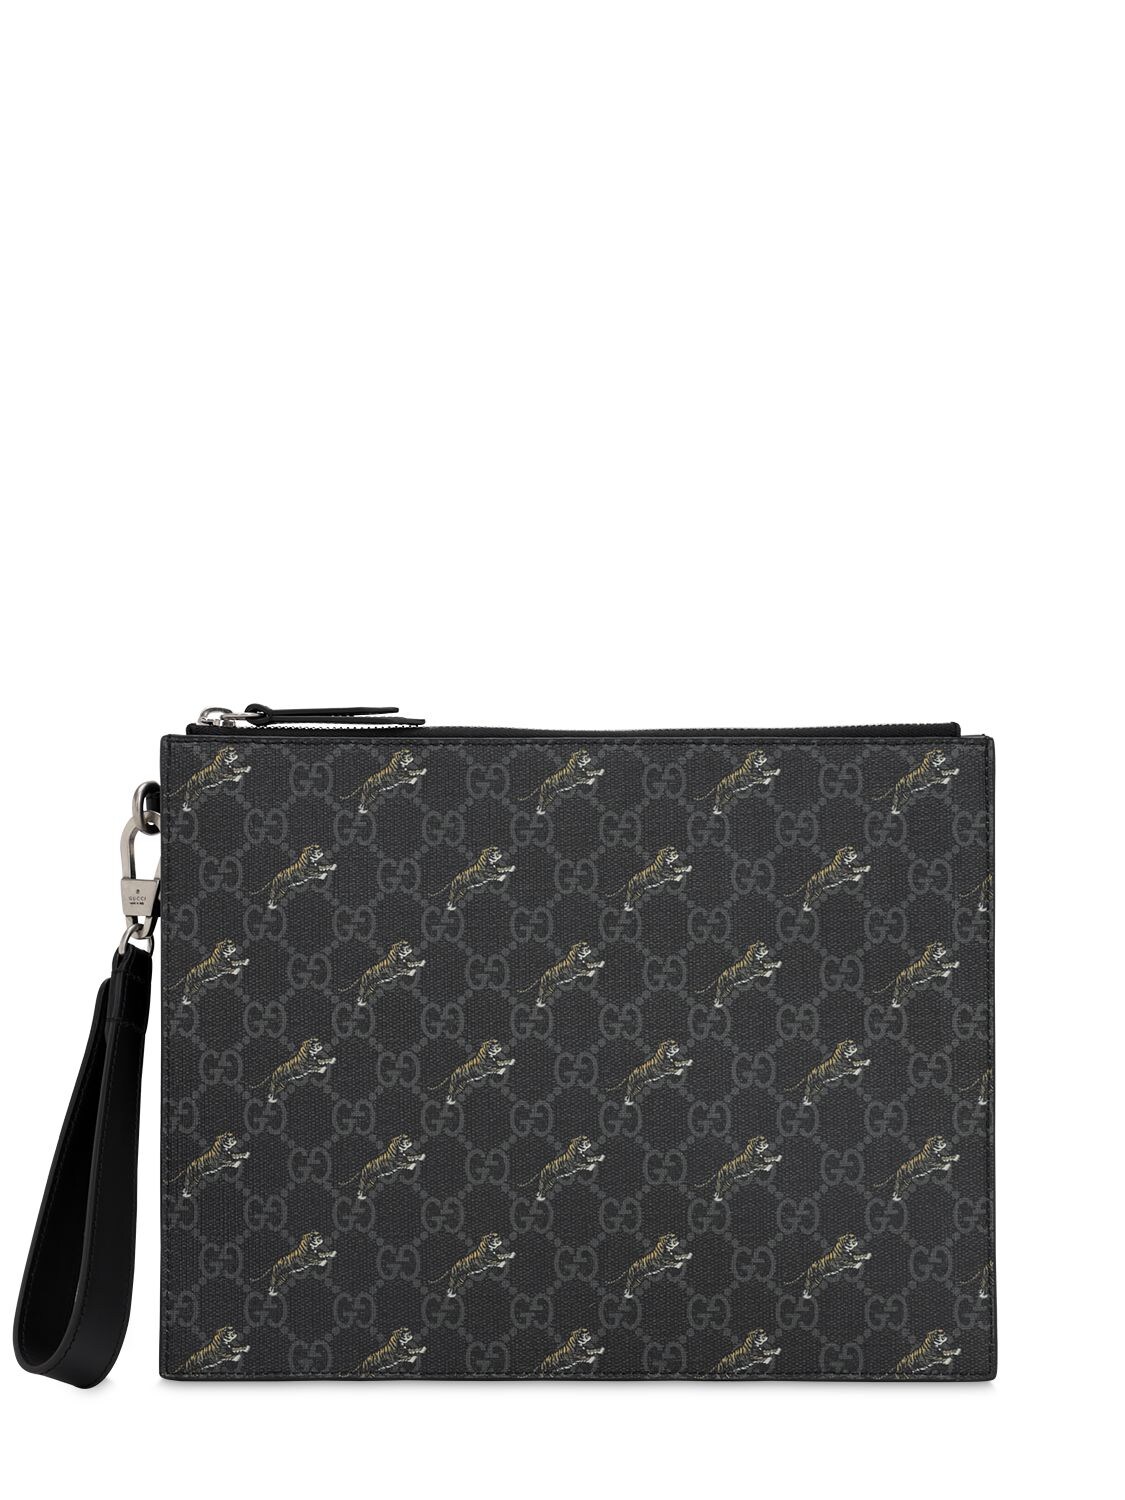 Gucci Gg Tiger Coated Canvas Pouch In Black